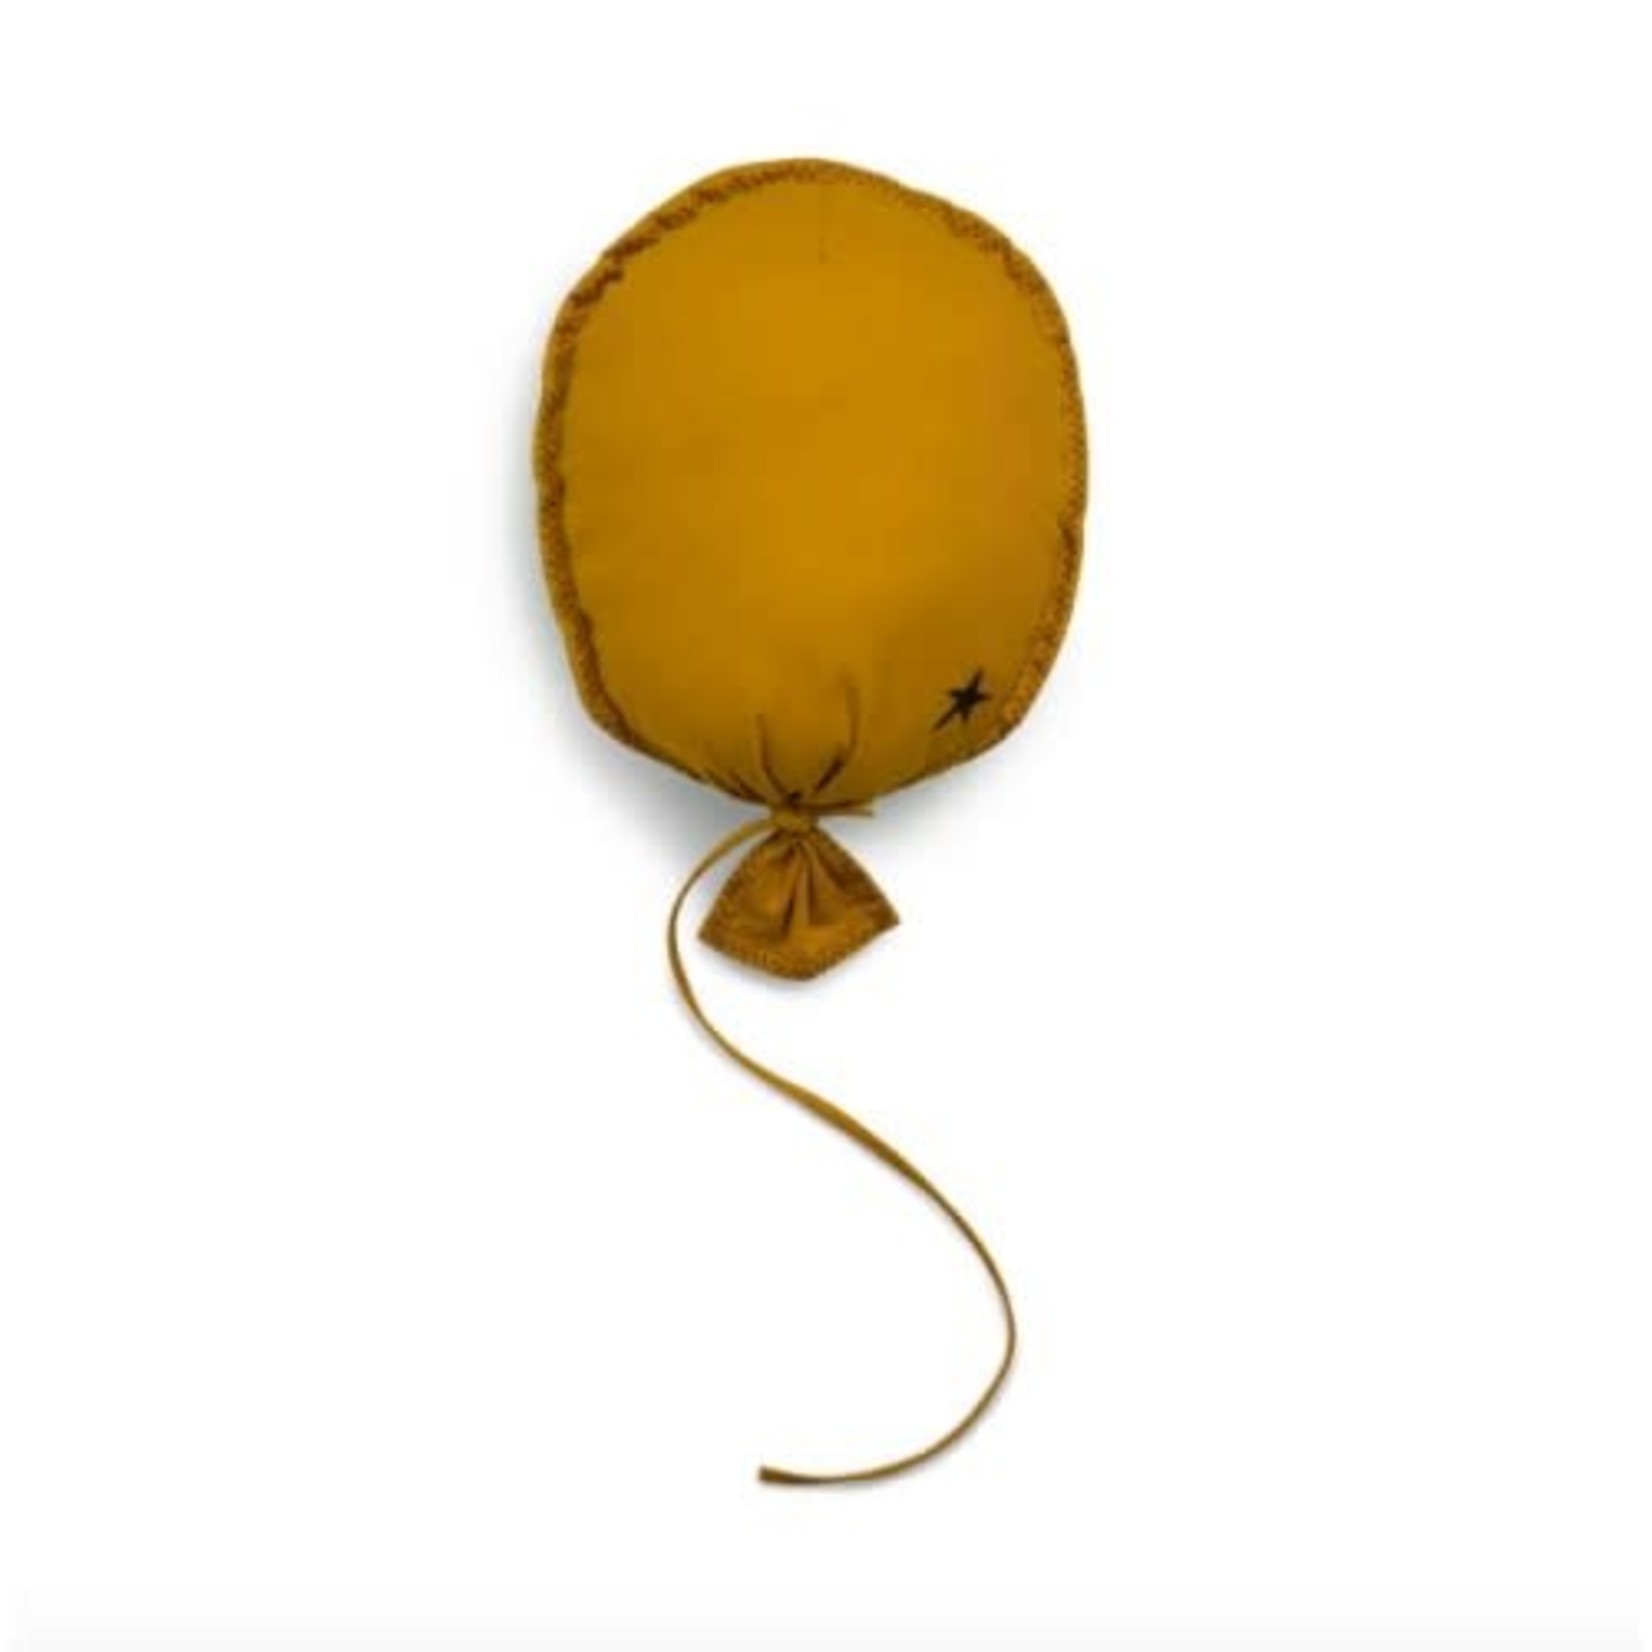 Picca Loulou Yellow Balloon Ochre Wall Decoration - 40 cm - 16"